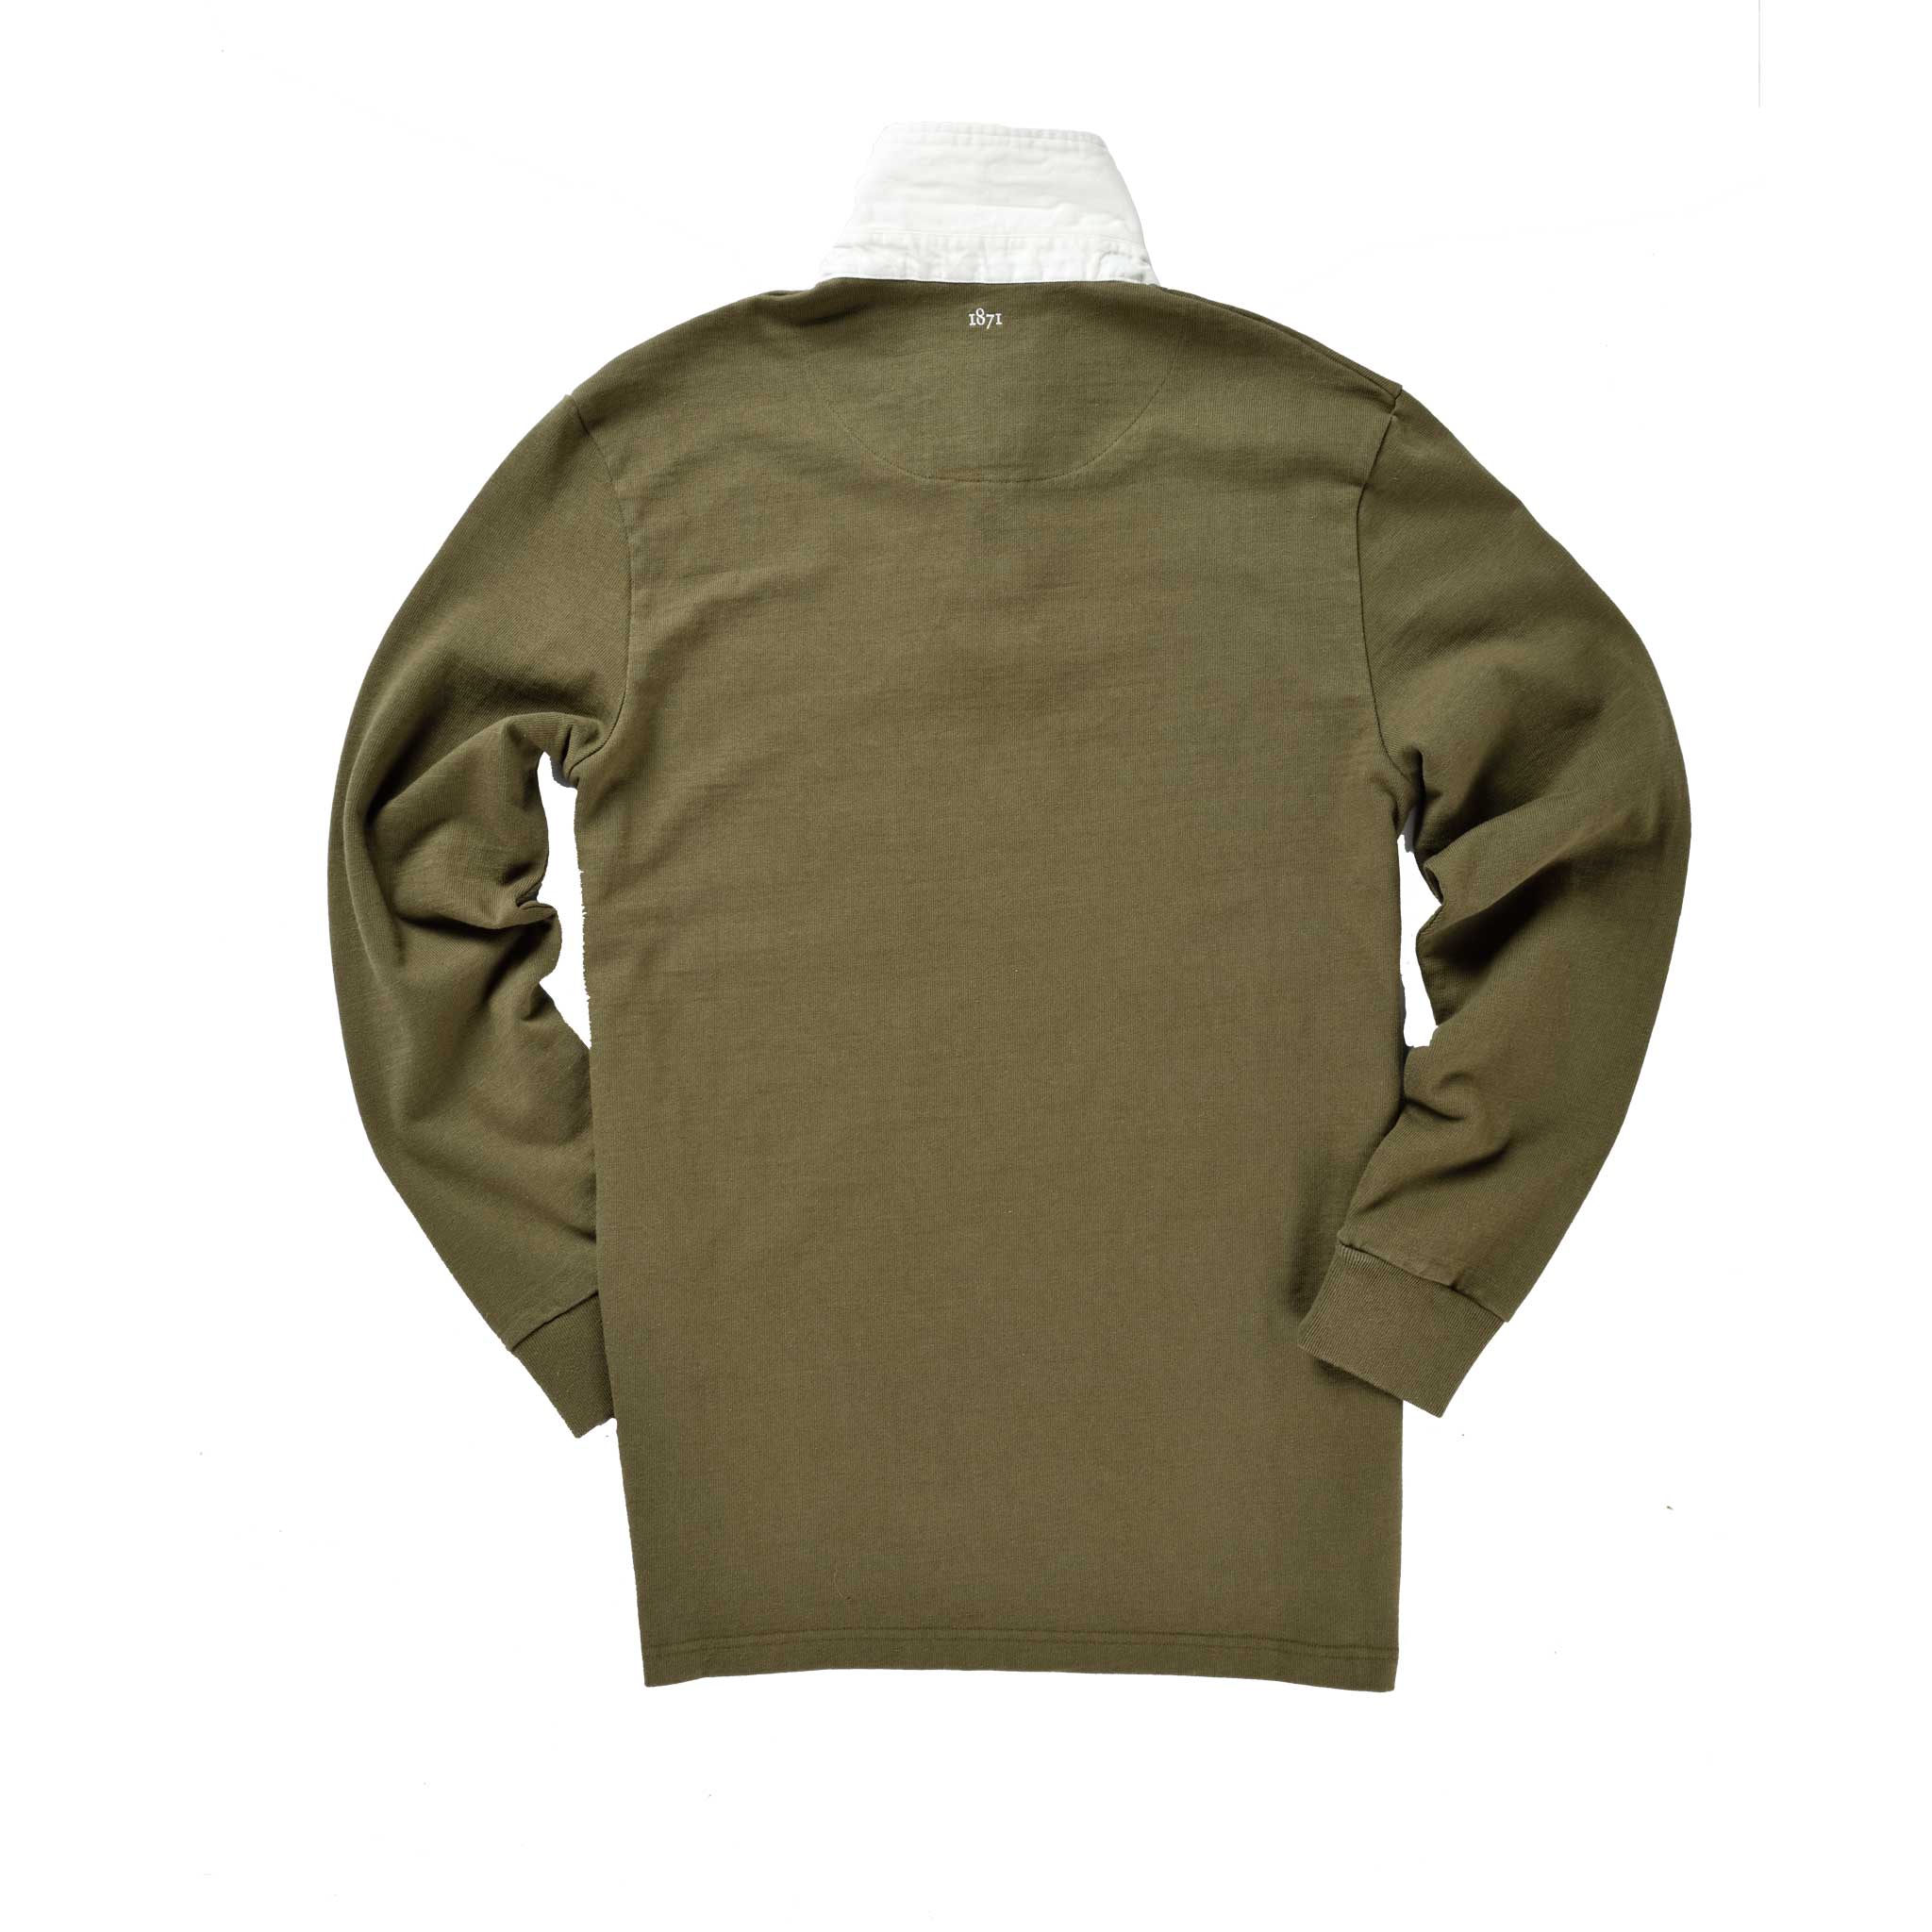 Classic Olive 1871 Rugby Shirt_Back